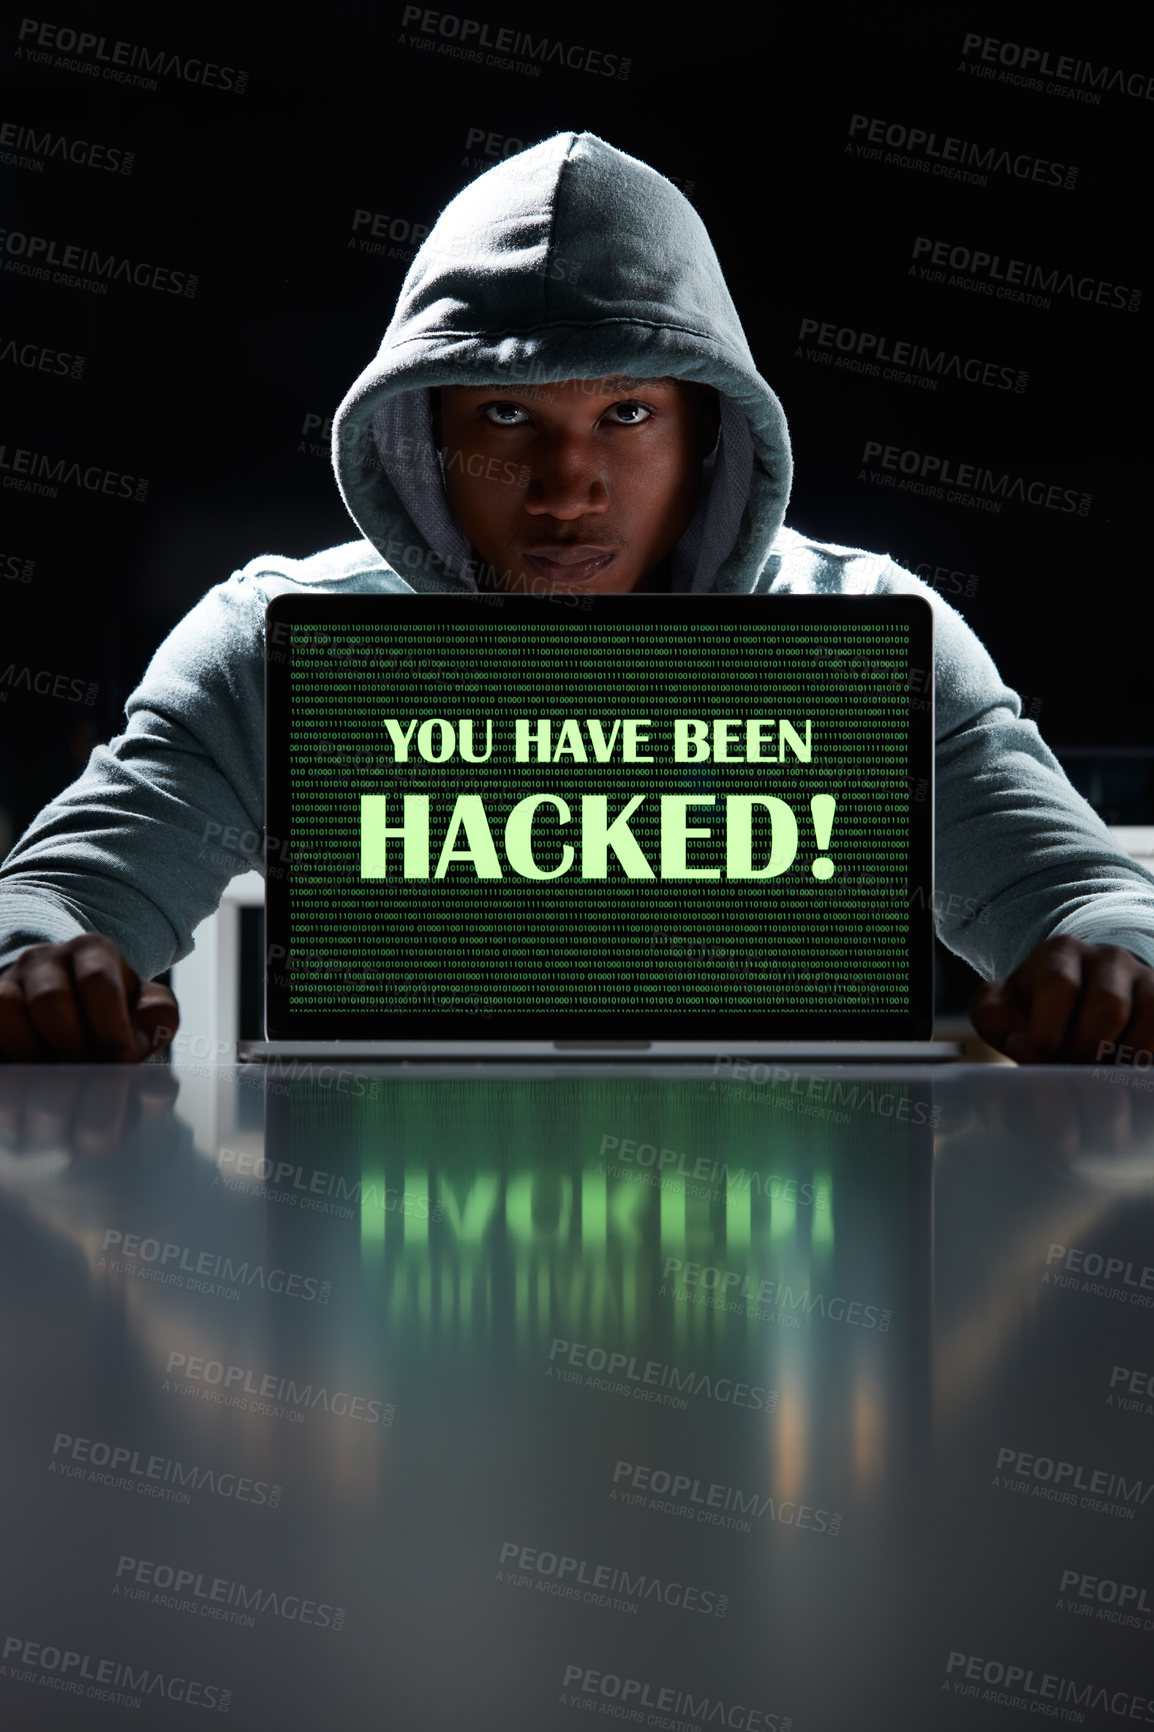 Buy stock photo Shot of a young hacker using a laptop with the words “You have been hacked” on it